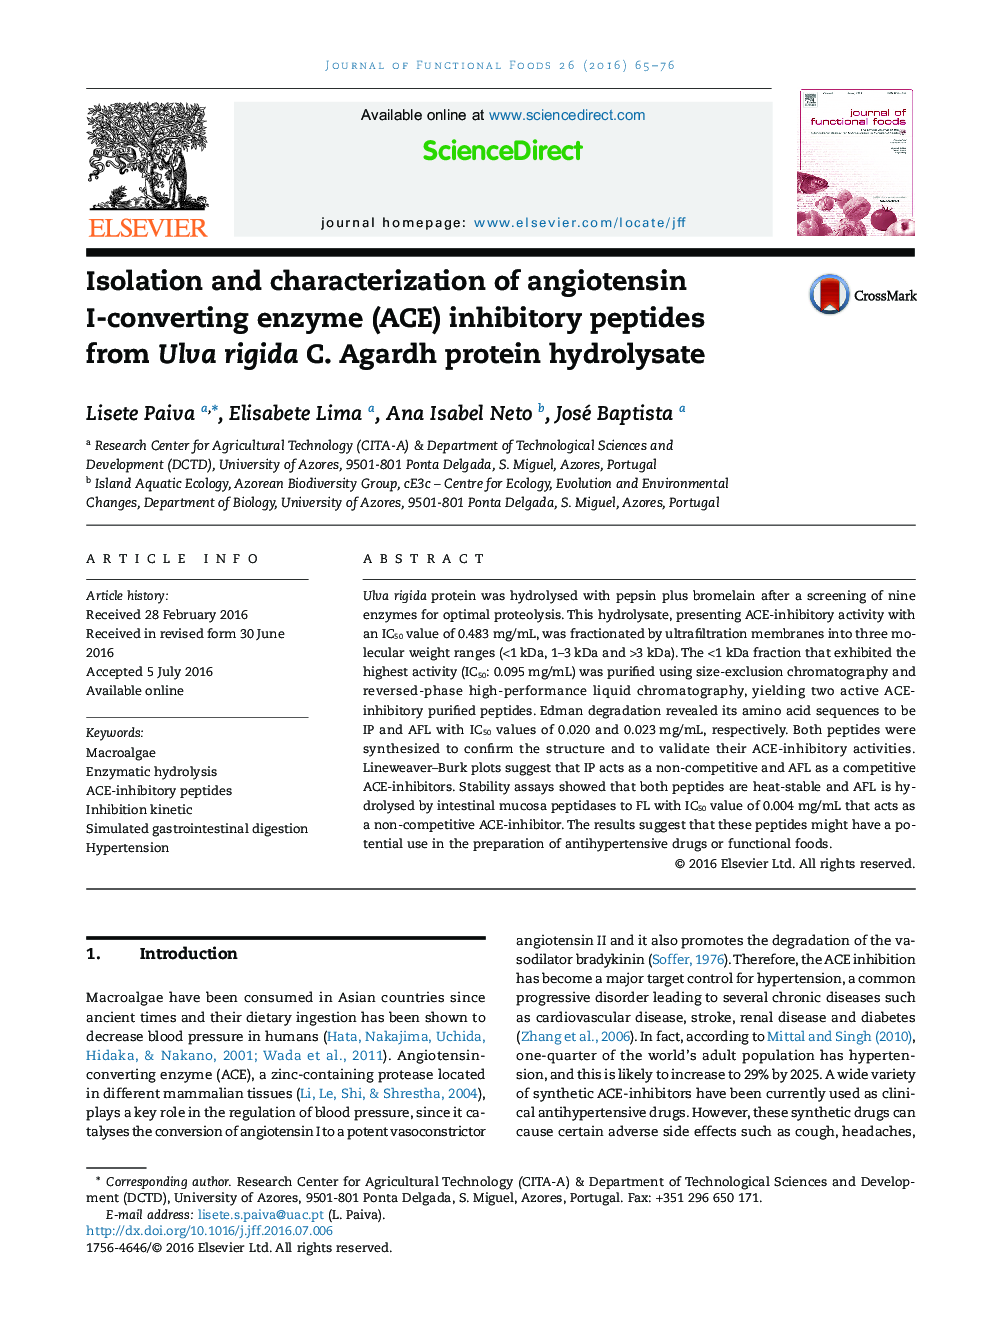 Isolation and characterization of angiotensin I-converting enzyme (ACE) inhibitory peptides from Ulva rigida C. Agardh protein hydrolysate